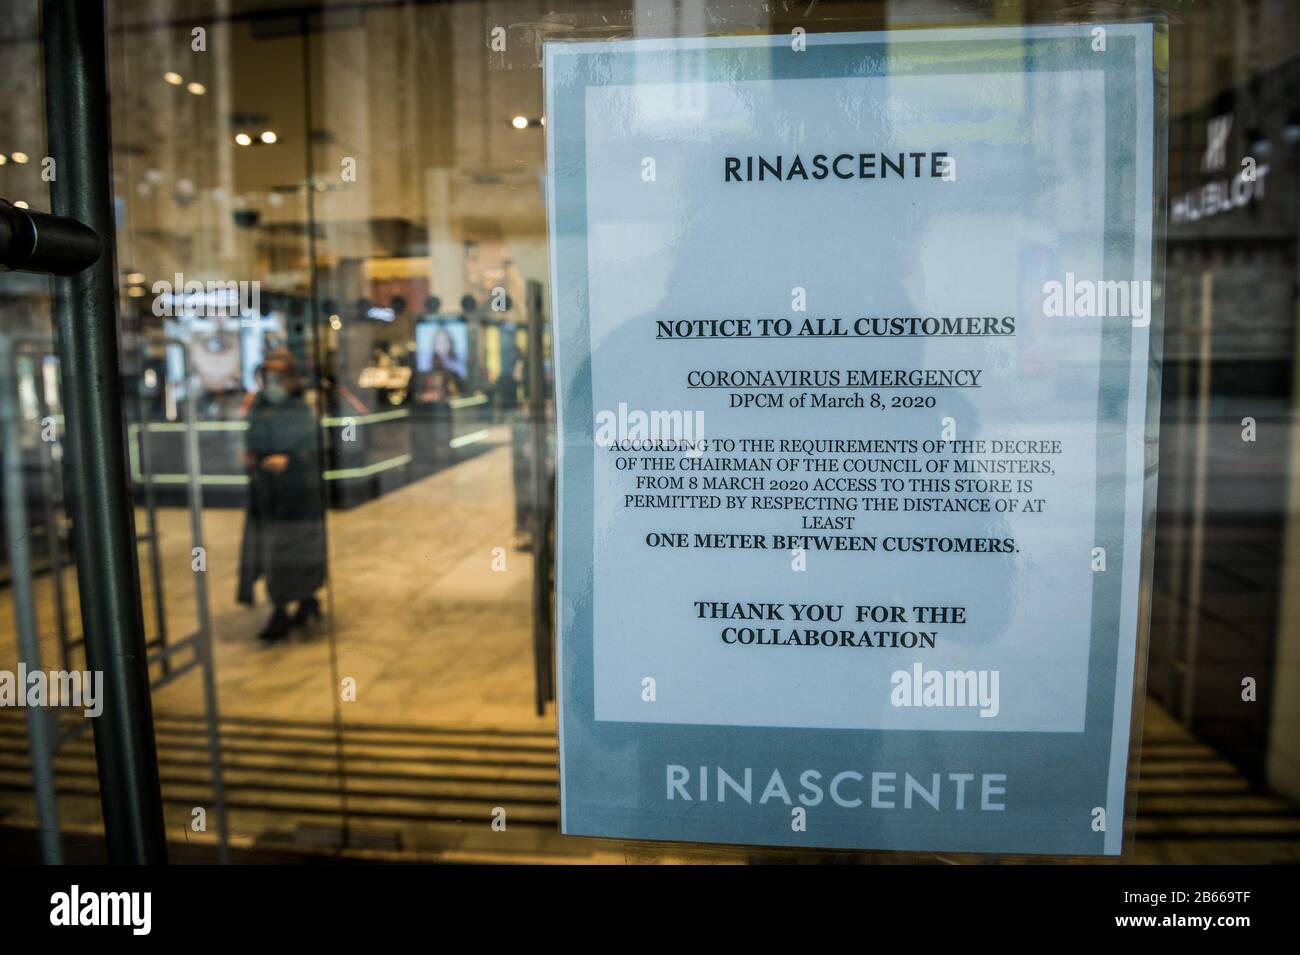 Milan. Galleria center, corso vittorio emanuele and cathedral with few people and shops closed due to COVID19 Coronavirus Editorial Usage Only Stock Photo